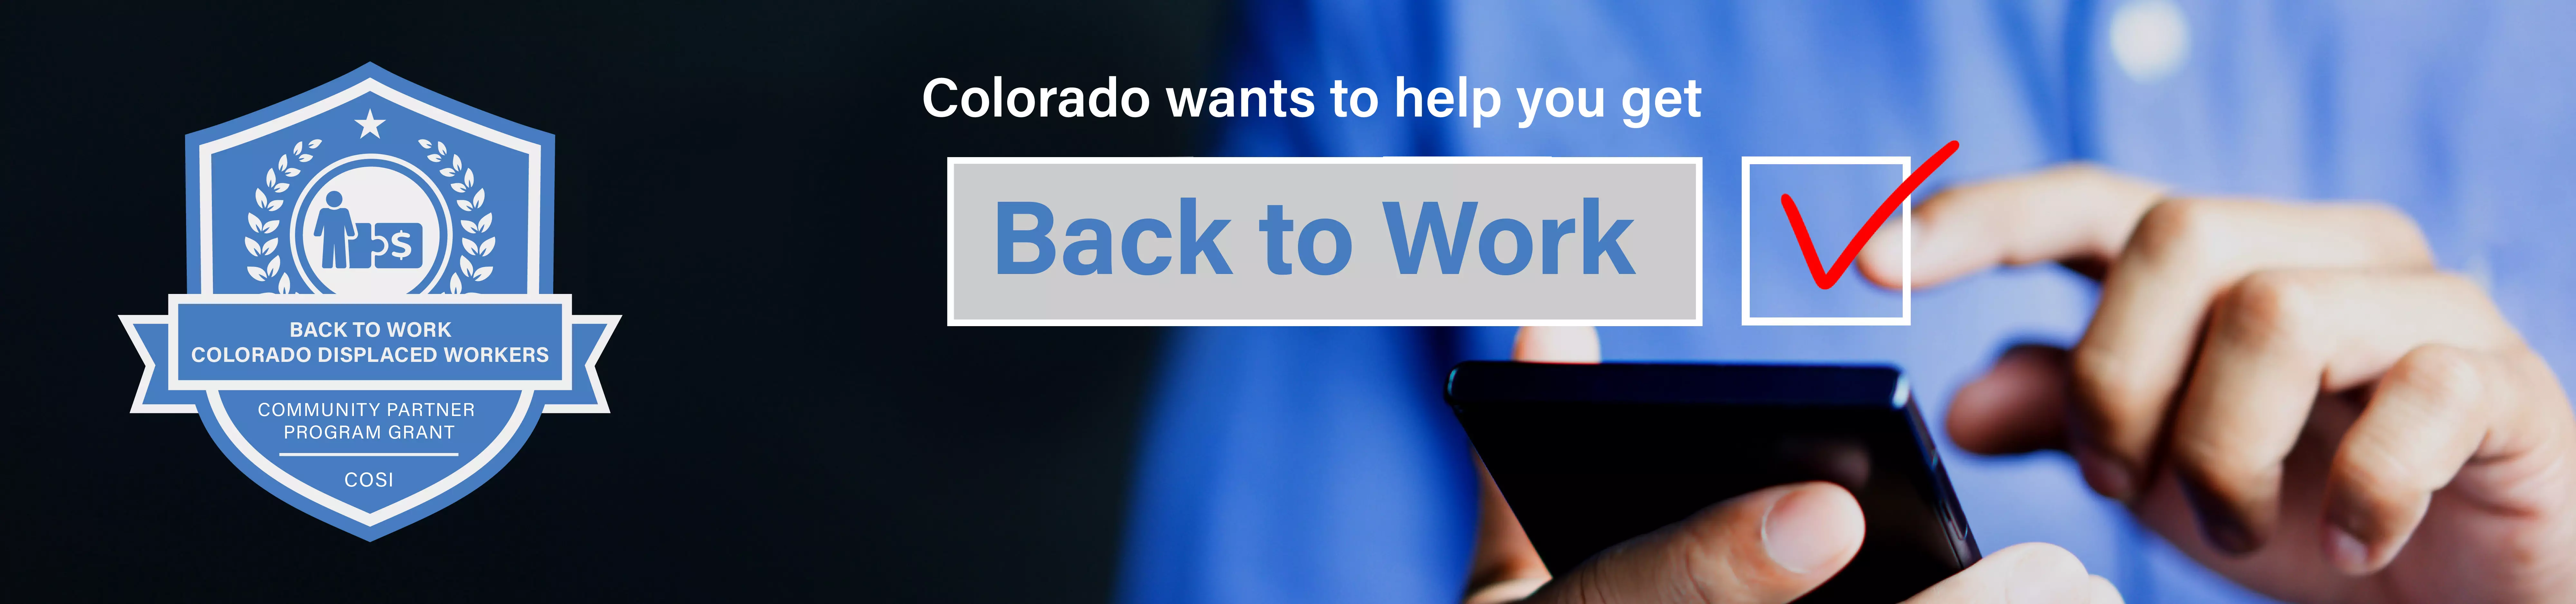 Words "Colorado wants you to get Back to Work" with a hand checking a box